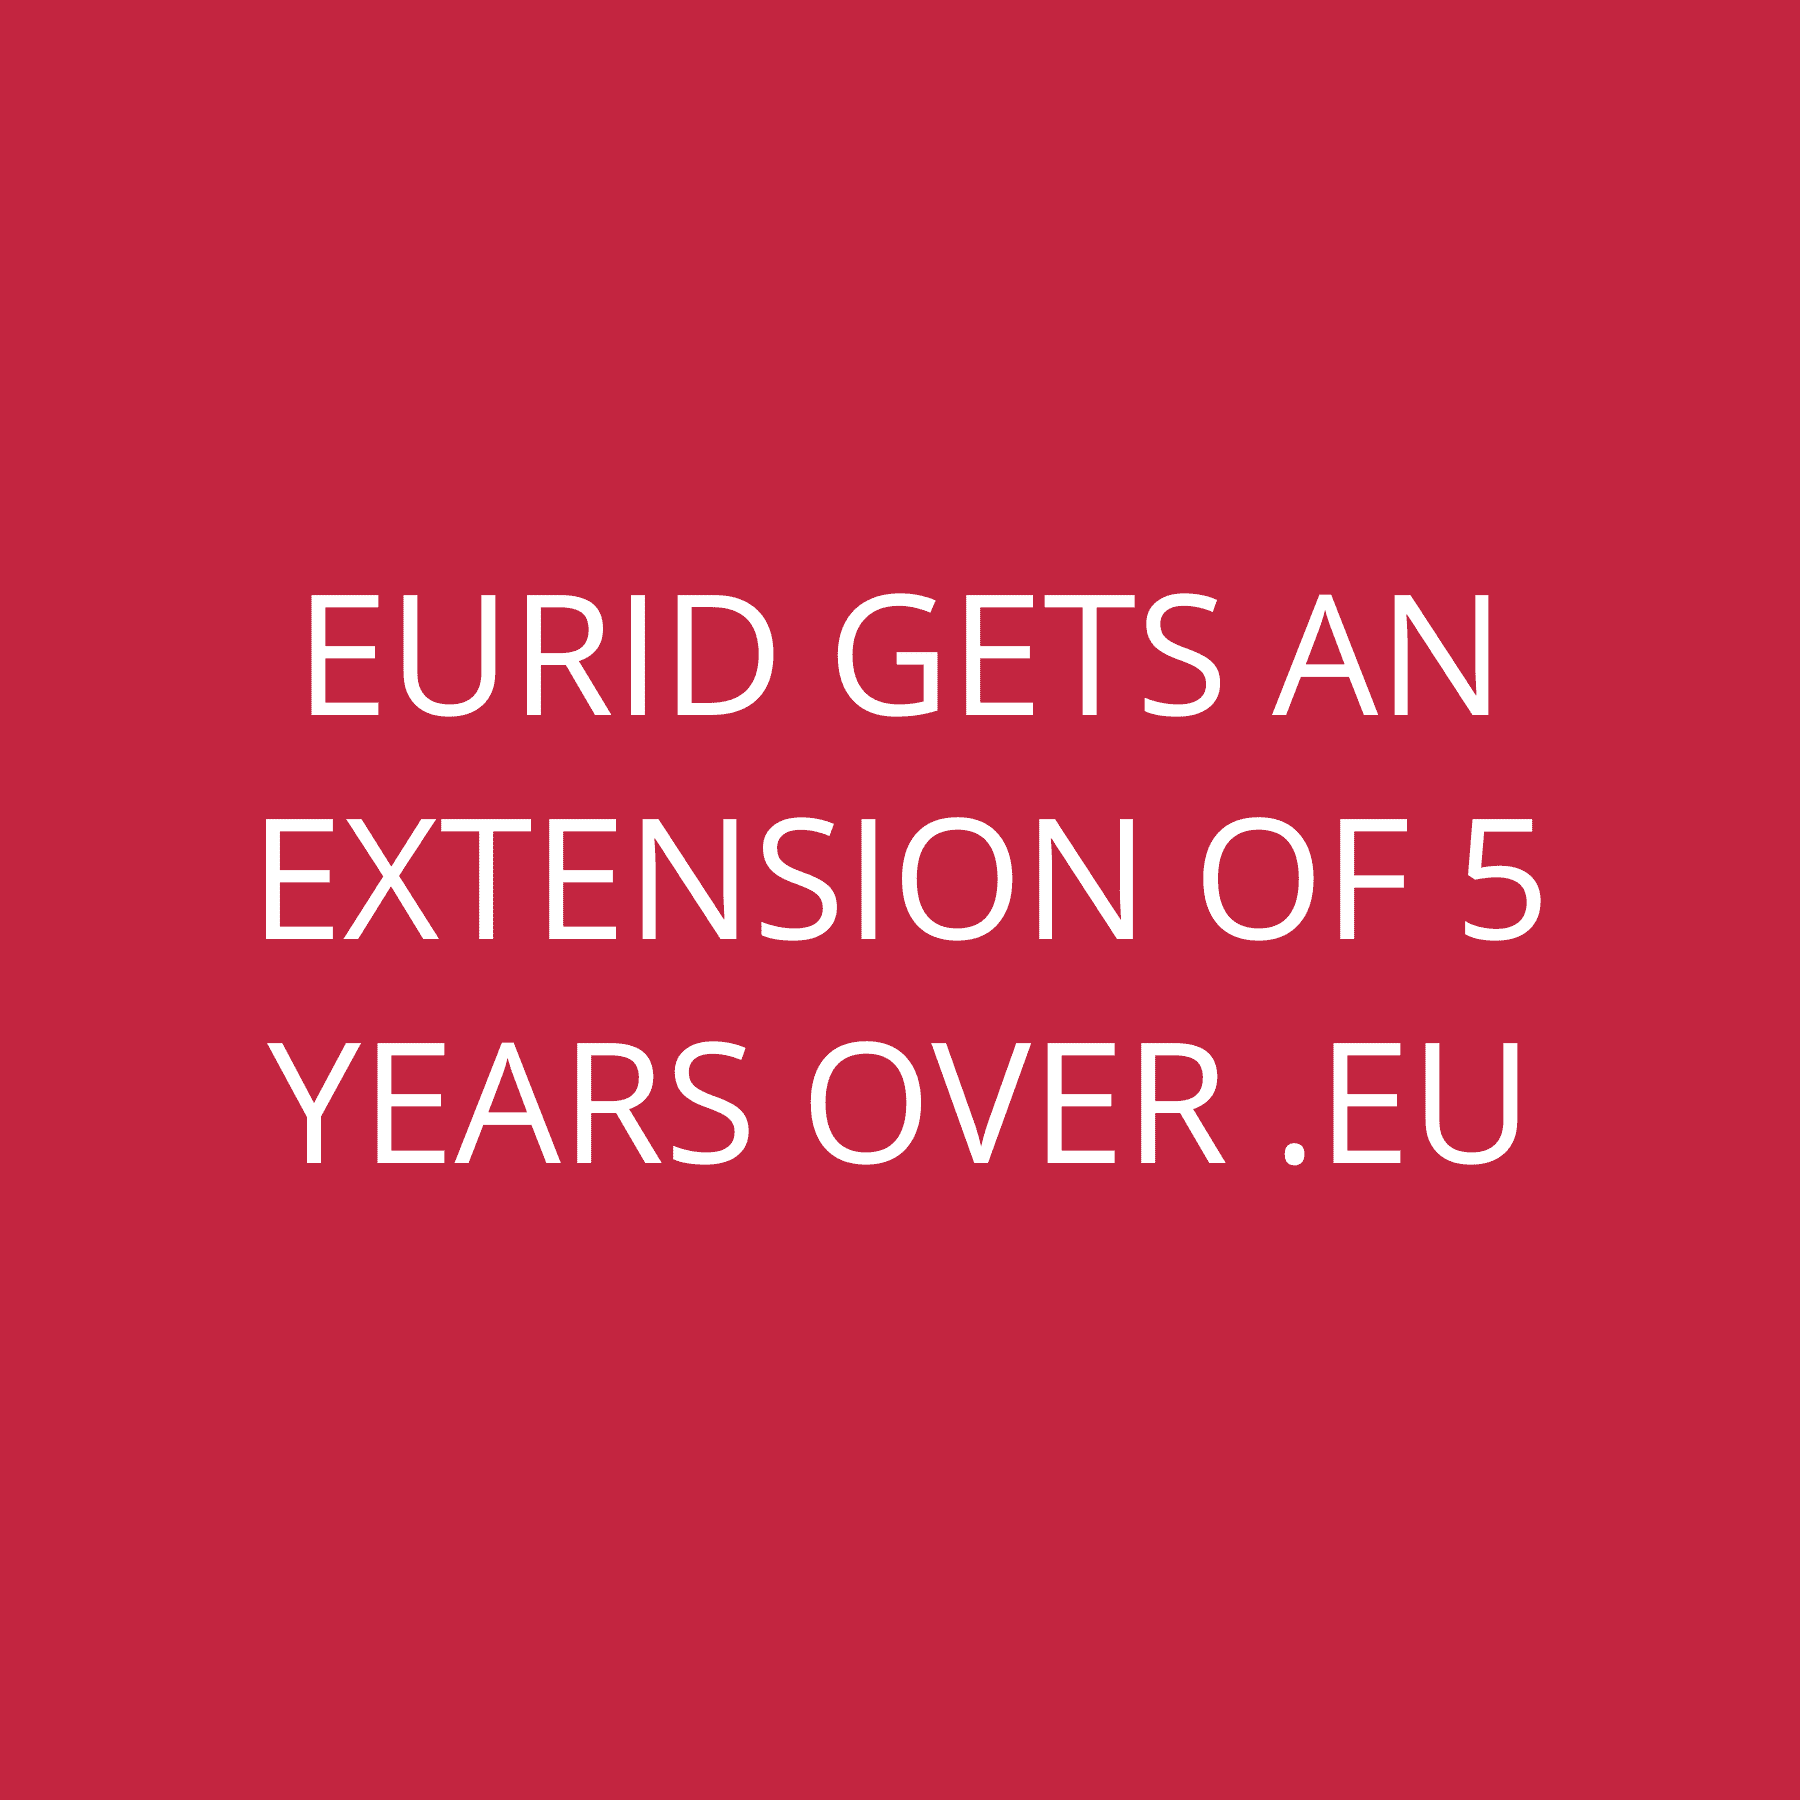 EURid gets an extension of 5 years over .eu